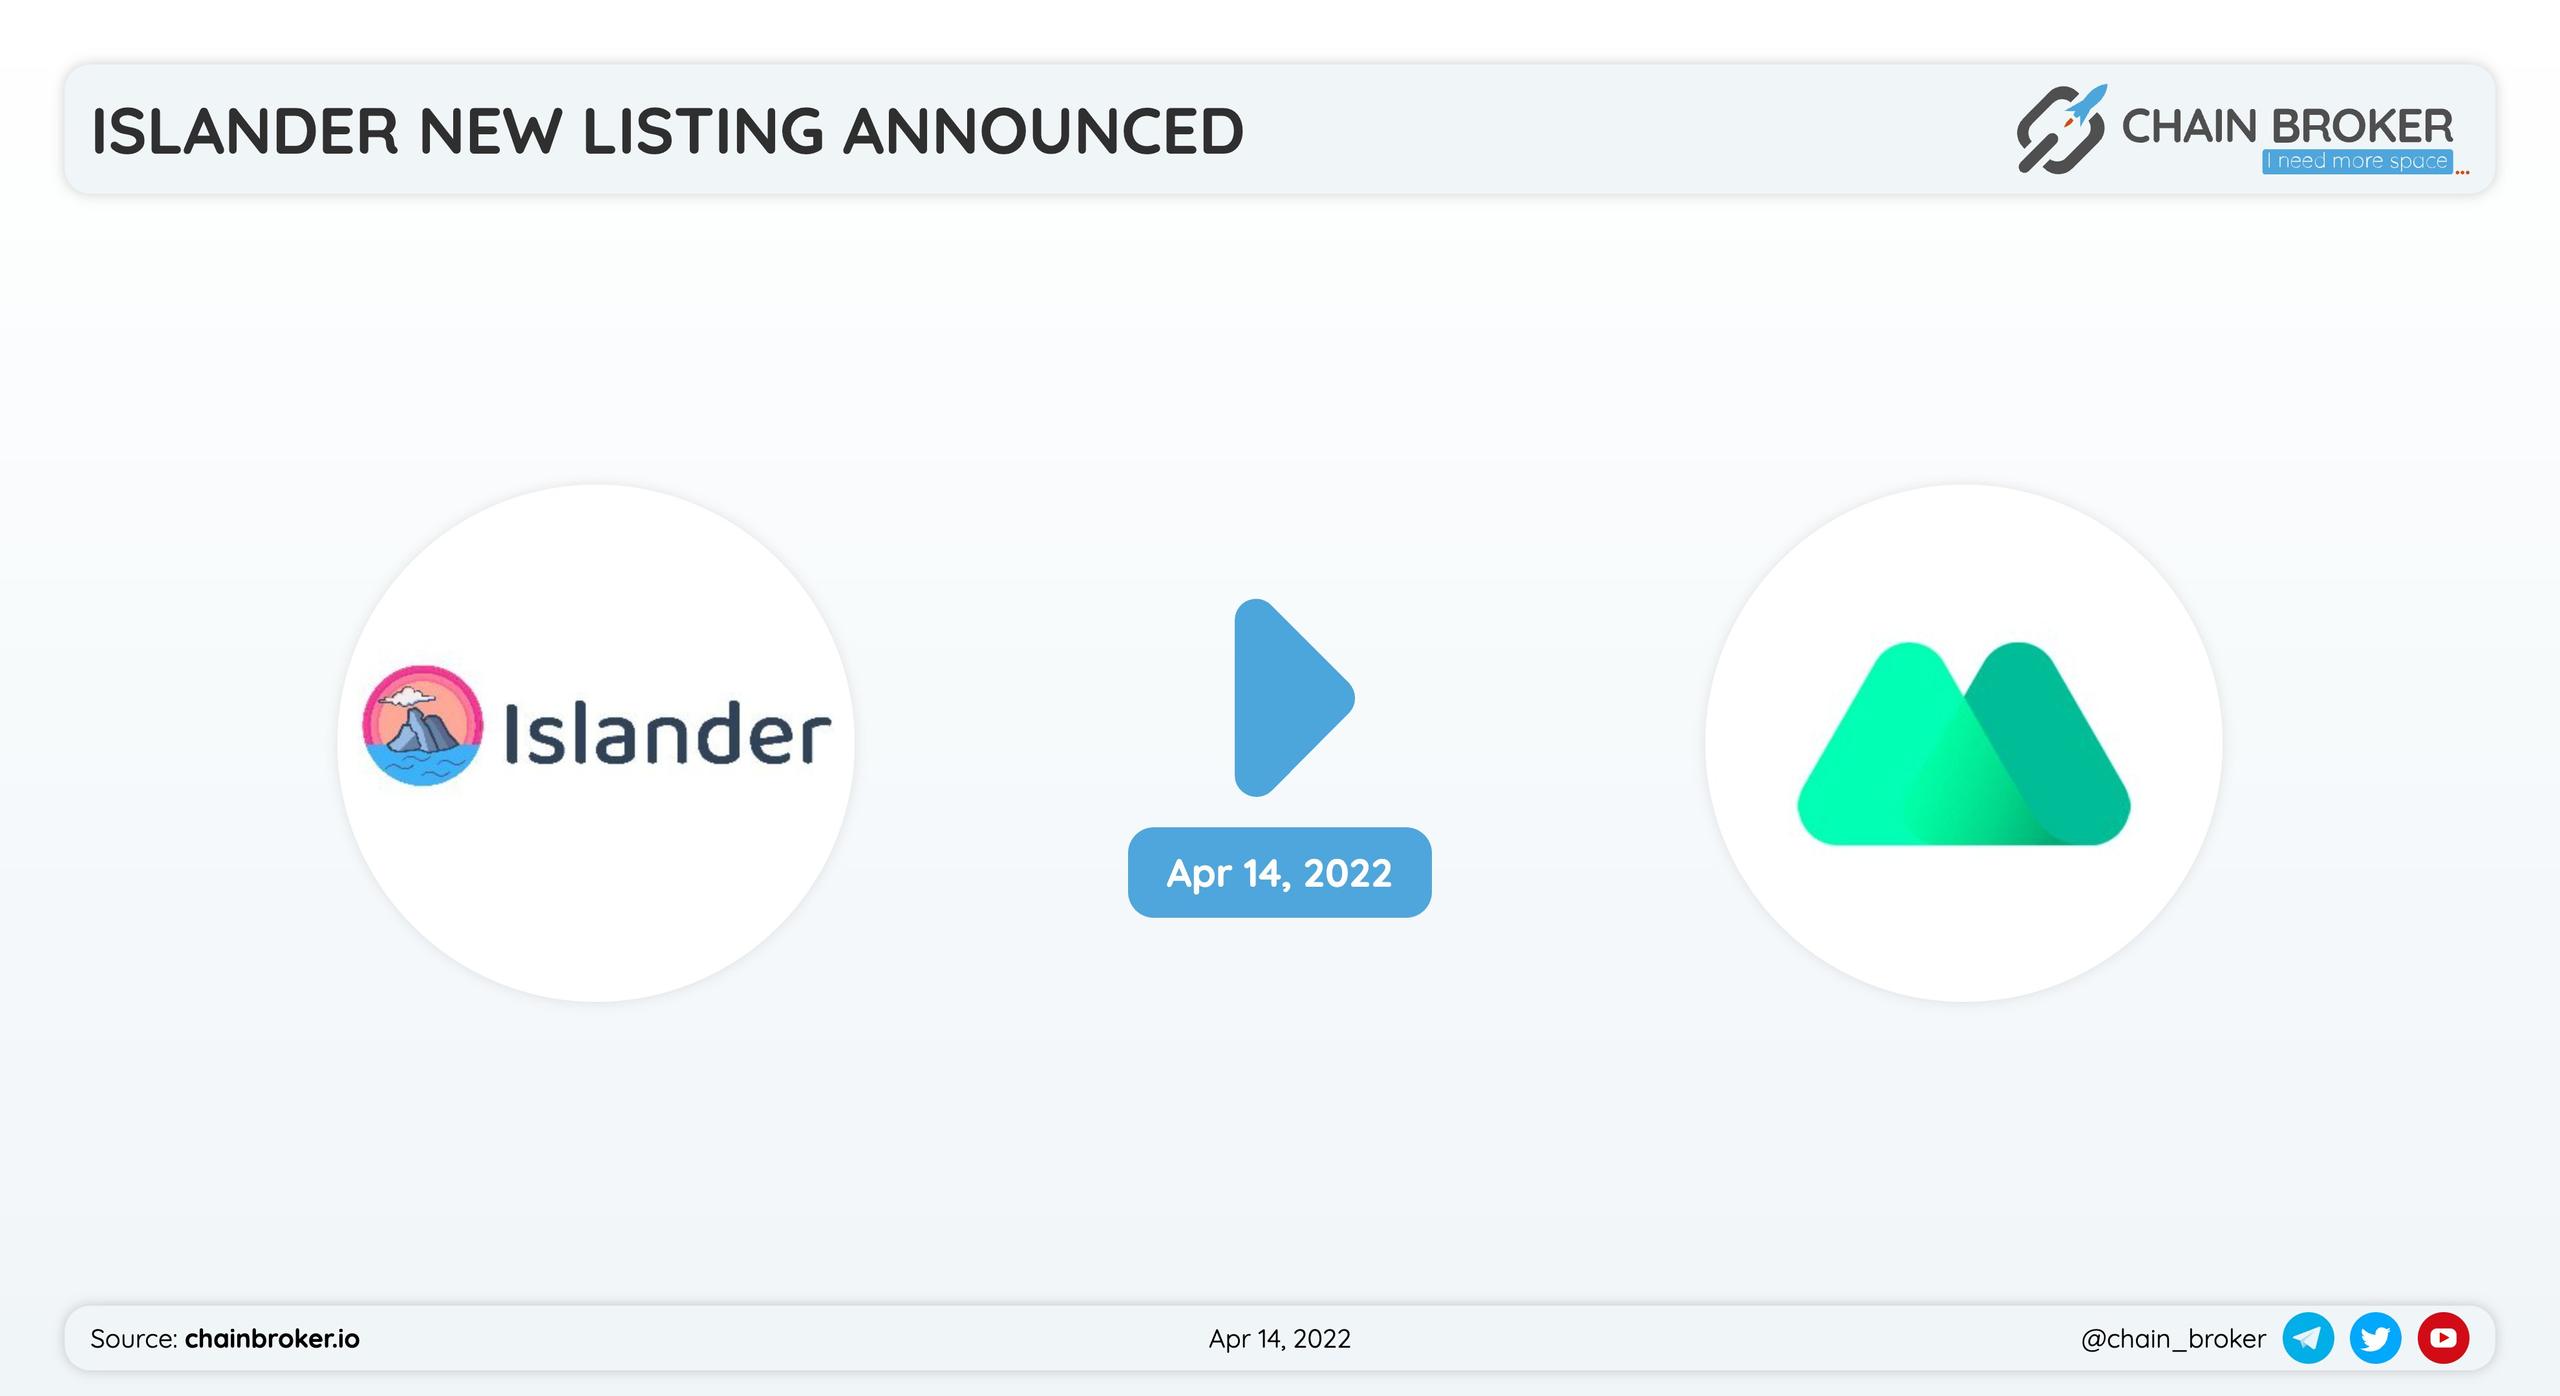 Islander has partnered with MEXC for a token listing.